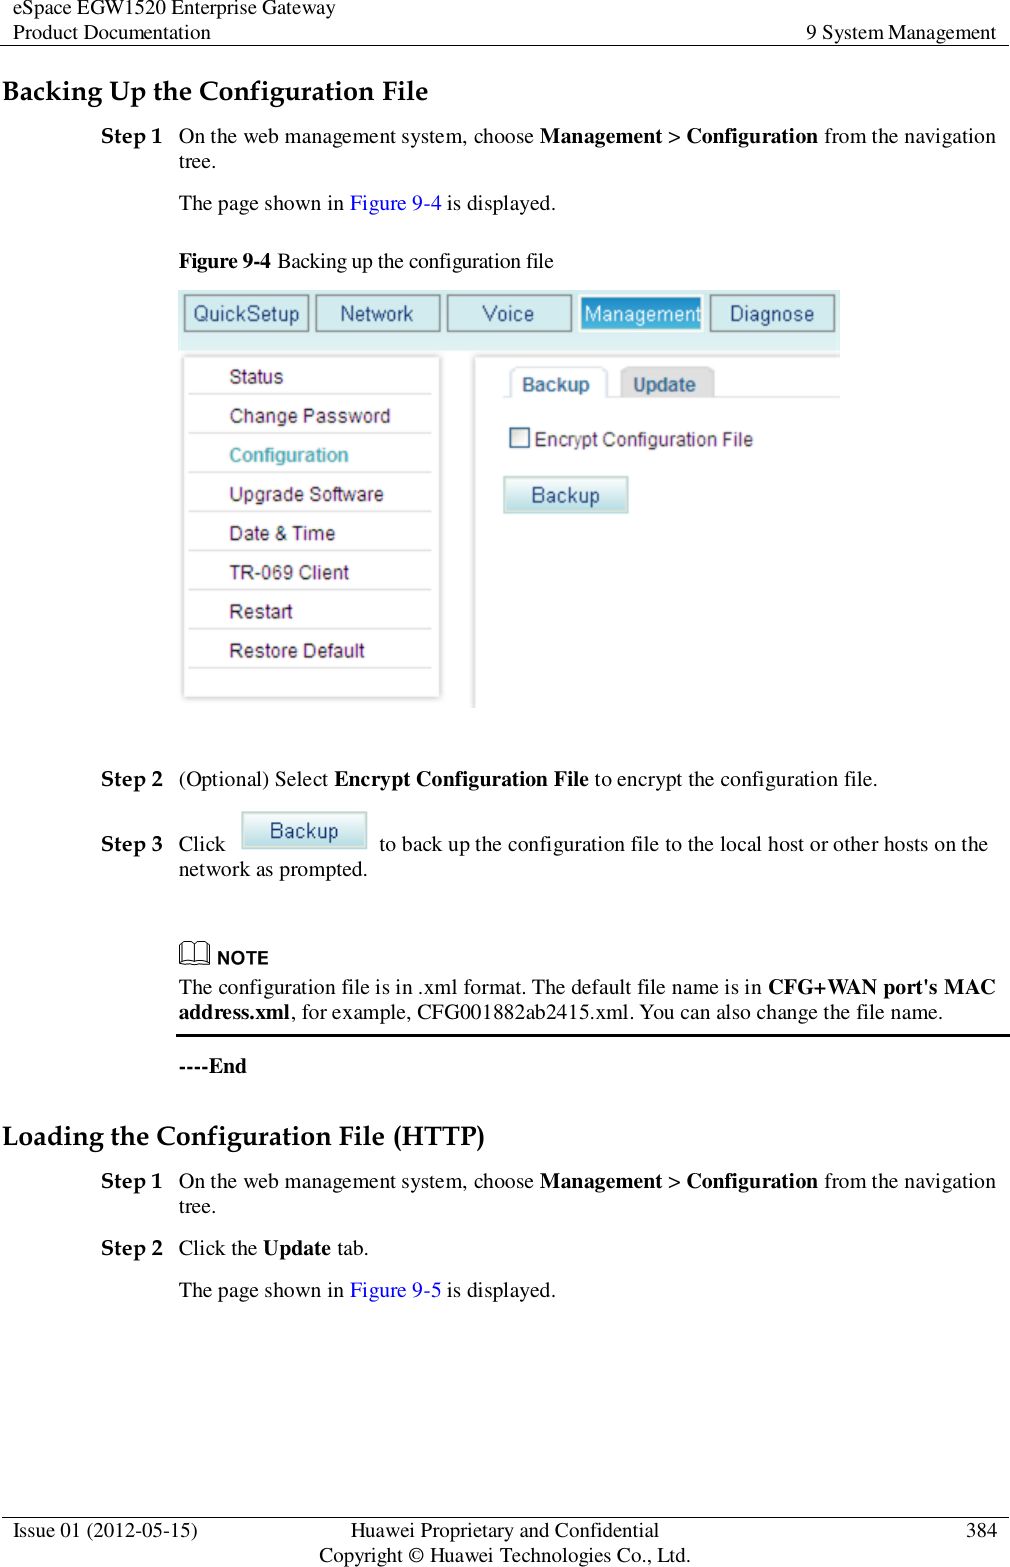 eSpace EGW1520 Enterprise Gateway Product Documentation 9 System Management  Issue 01 (2012-05-15) Huawei Proprietary and Confidential                                     Copyright © Huawei Technologies Co., Ltd. 384  Backing Up the Configuration File Step 1 On the web management system, choose Management &gt; Configuration from the navigation tree. The page shown in Figure 9-4 is displayed. Figure 9-4 Backing up the configuration file   Step 2 (Optional) Select Encrypt Configuration File to encrypt the configuration file. Step 3 Click    to back up the configuration file to the local host or other hosts on the network as prompted.   The configuration file is in .xml format. The default file name is in CFG+WAN port&apos;s MAC address.xml, for example, CFG001882ab2415.xml. You can also change the file name. ----End Loading the Configuration File (HTTP) Step 1 On the web management system, choose Management &gt; Configuration from the navigation tree. Step 2 Click the Update tab. The page shown in Figure 9-5 is displayed. 